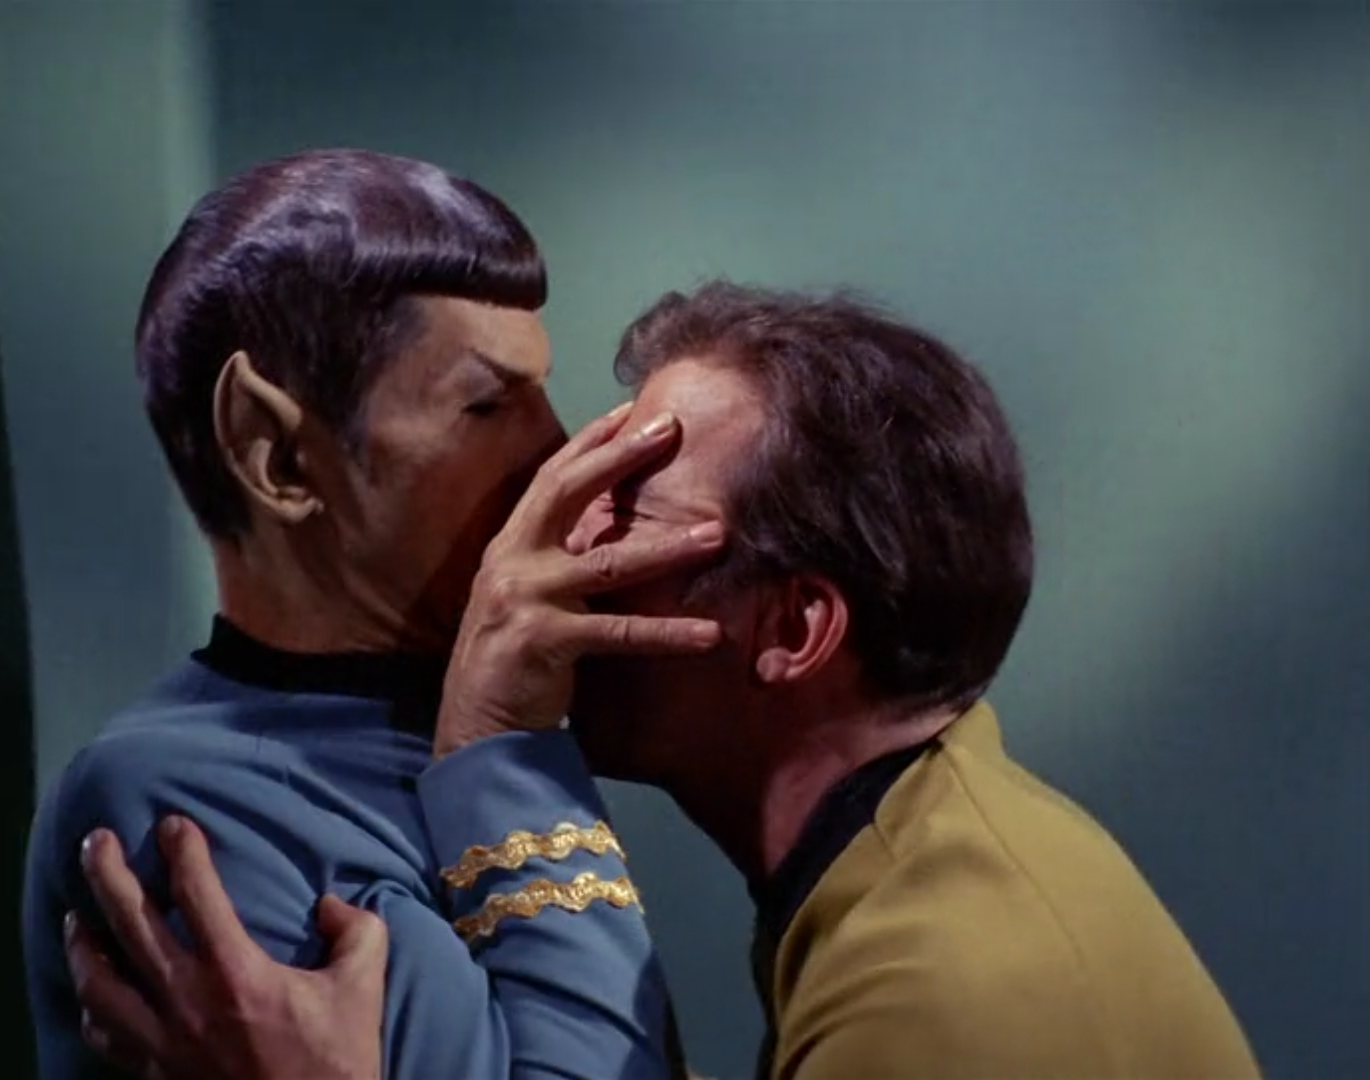 No "Spock Kirk handface" memes have been featured yet. 